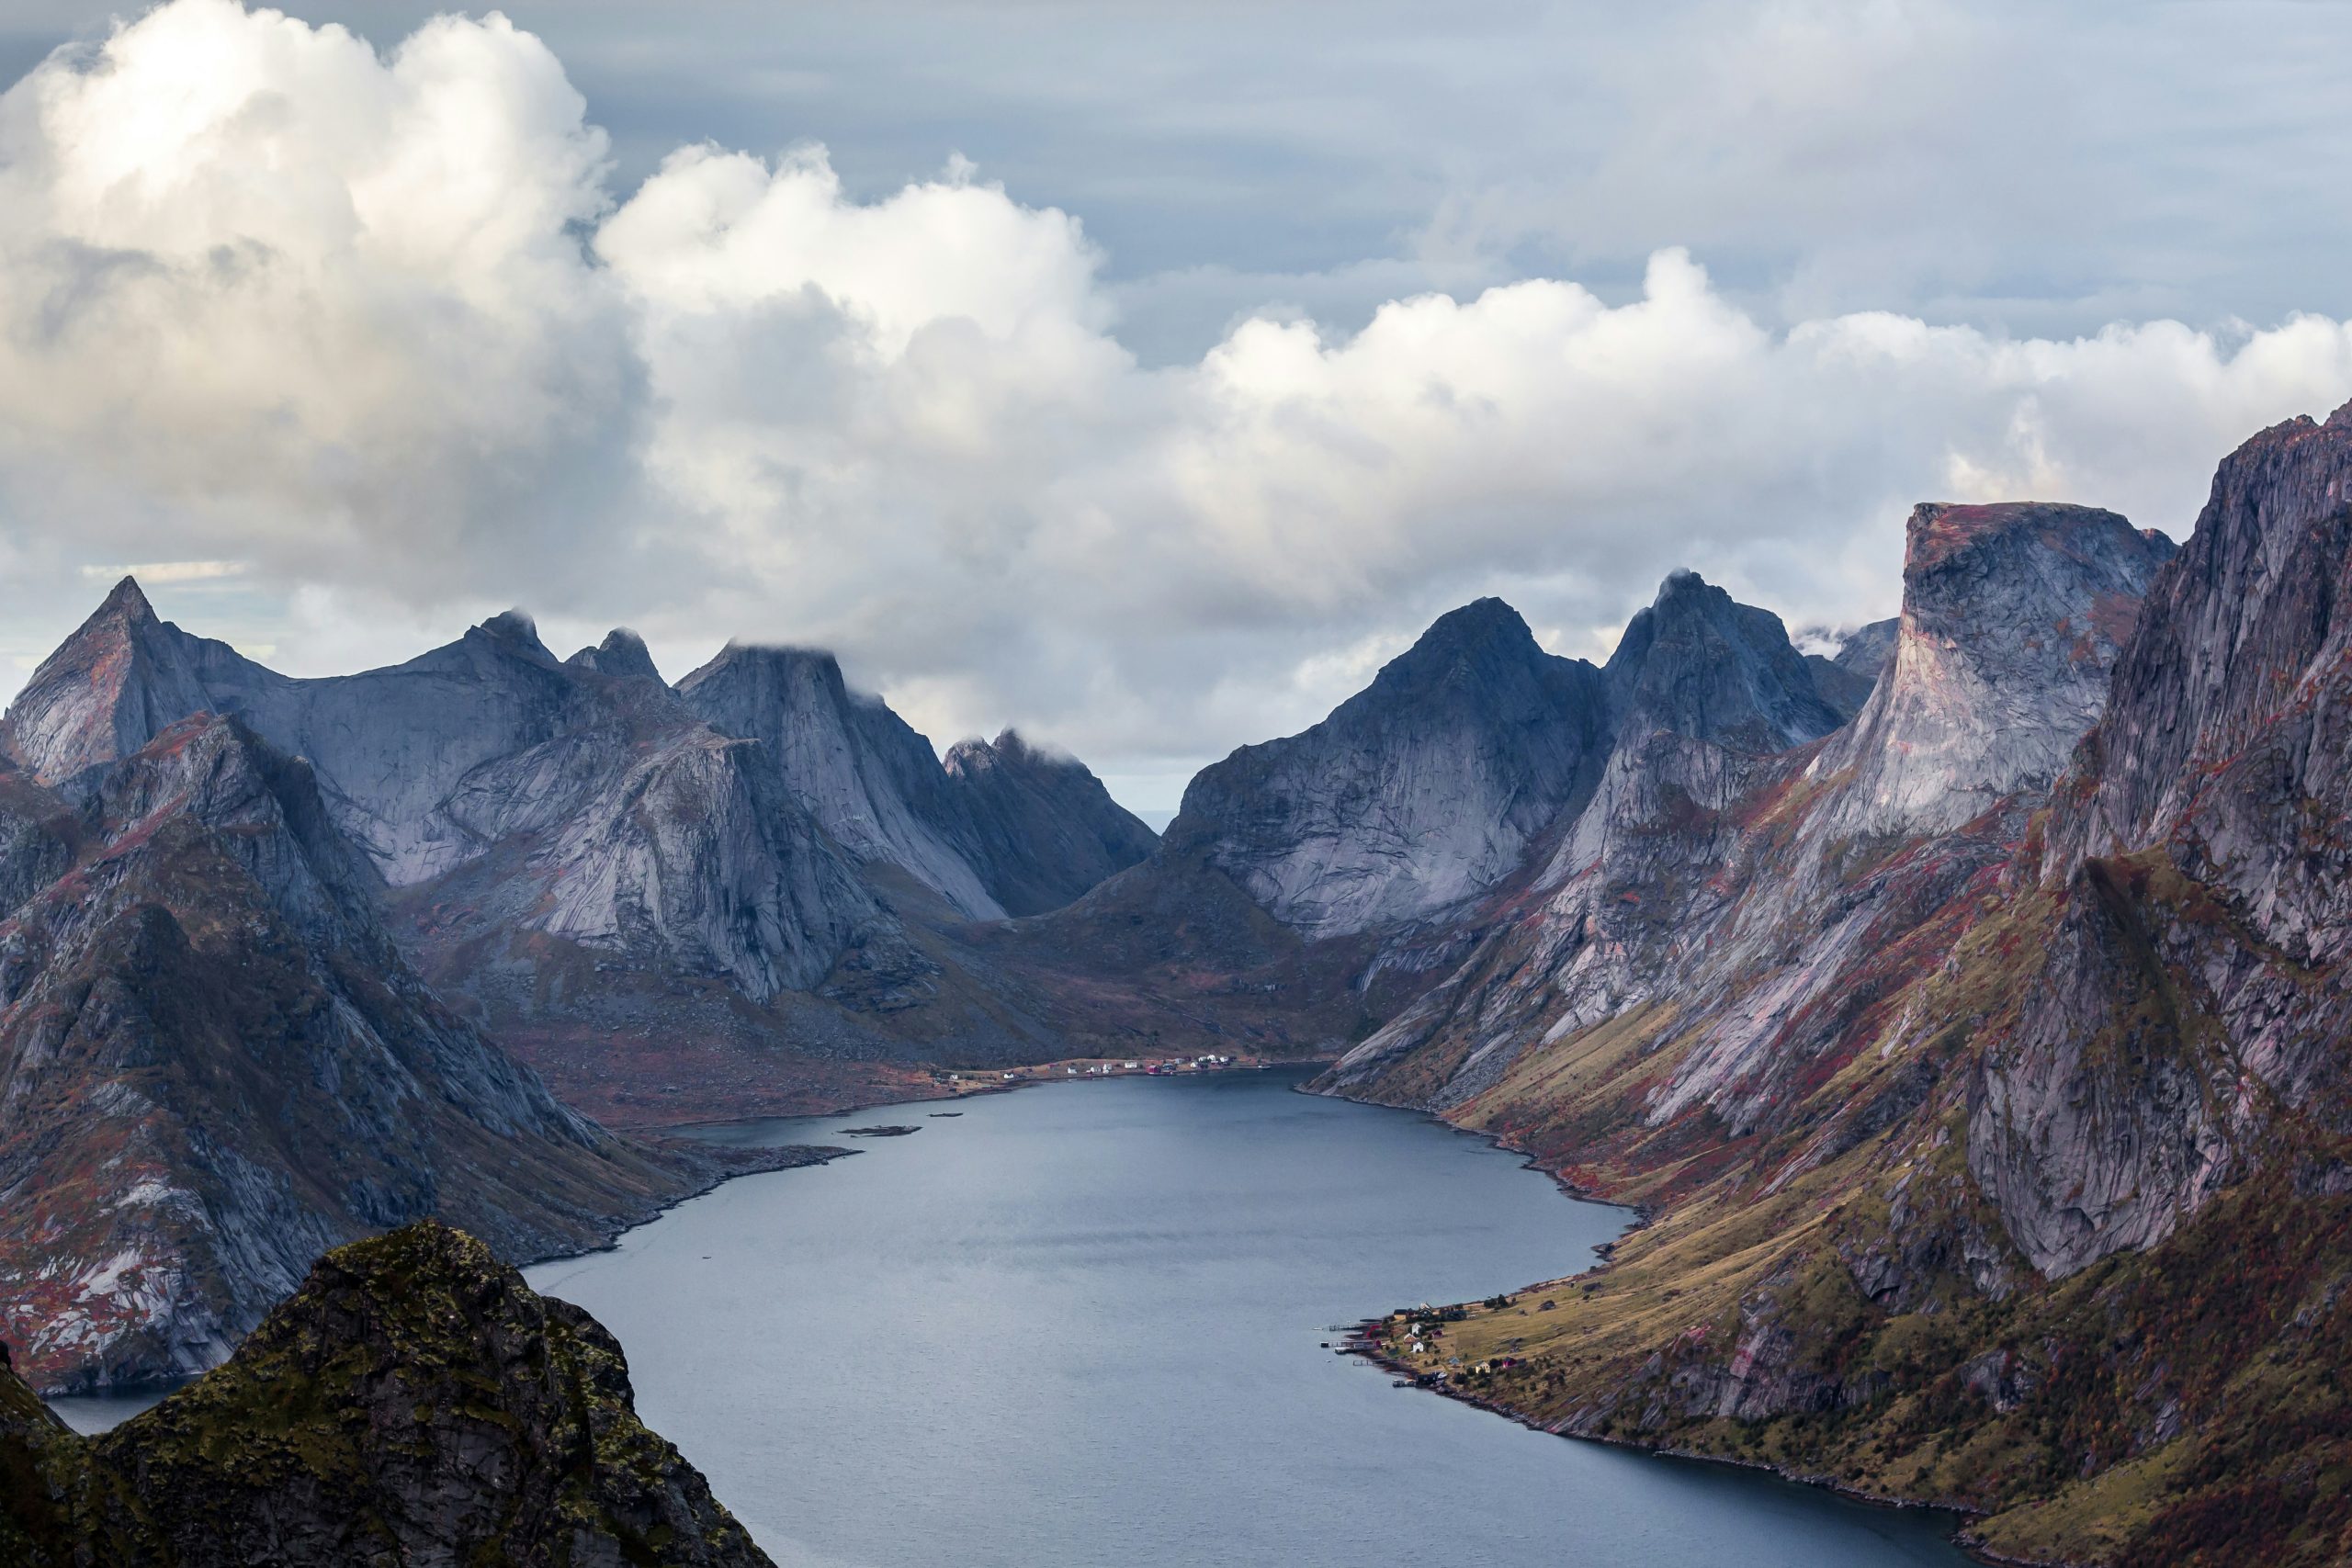 explore the breathtaking beauty of norway's fjords, a natural wonder known for its stunning landscapes, crystal clear waters, and towering cliffs. plan your adventure and discover the magic of these iconic natural landmarks.